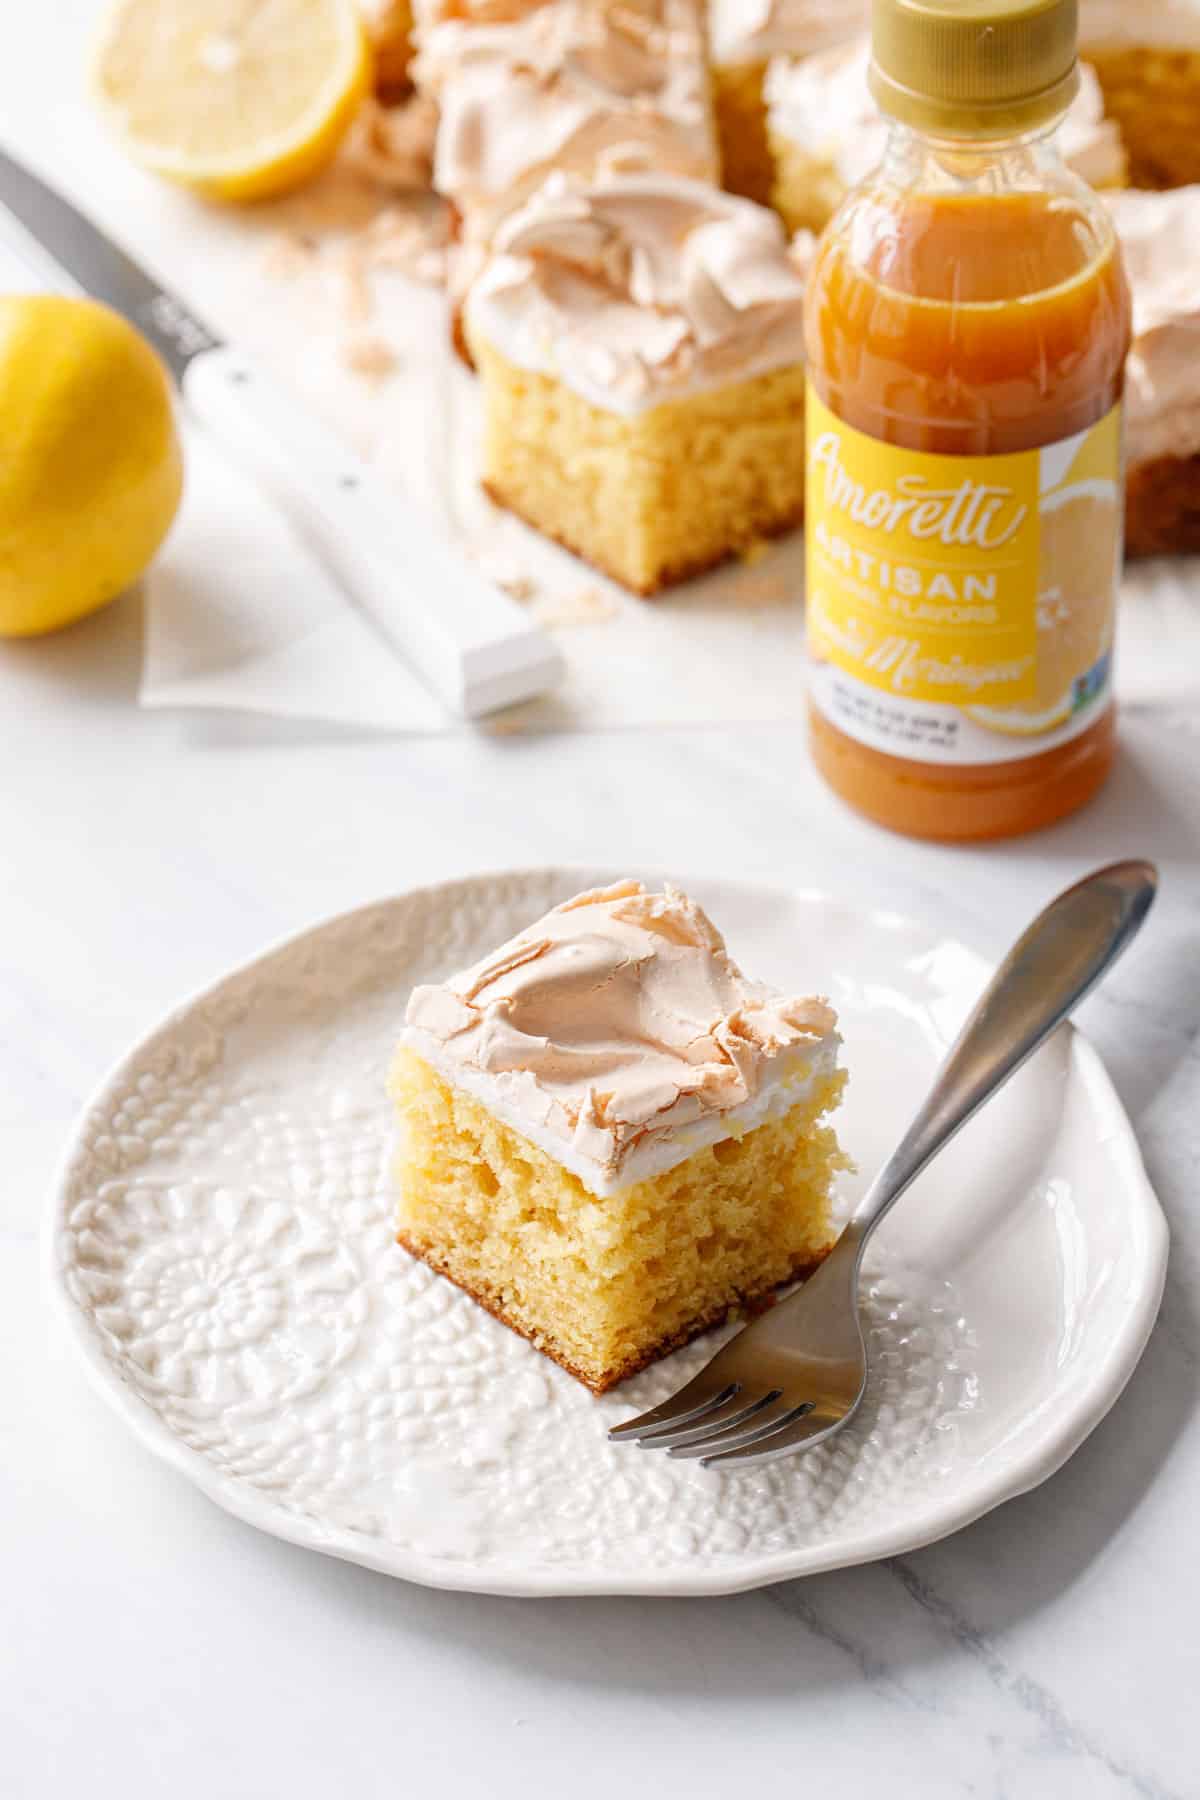 Piece of Lemon Meringue Butter Cake on a plate with a fork, bottle of lemon meringue flavoring in the background.